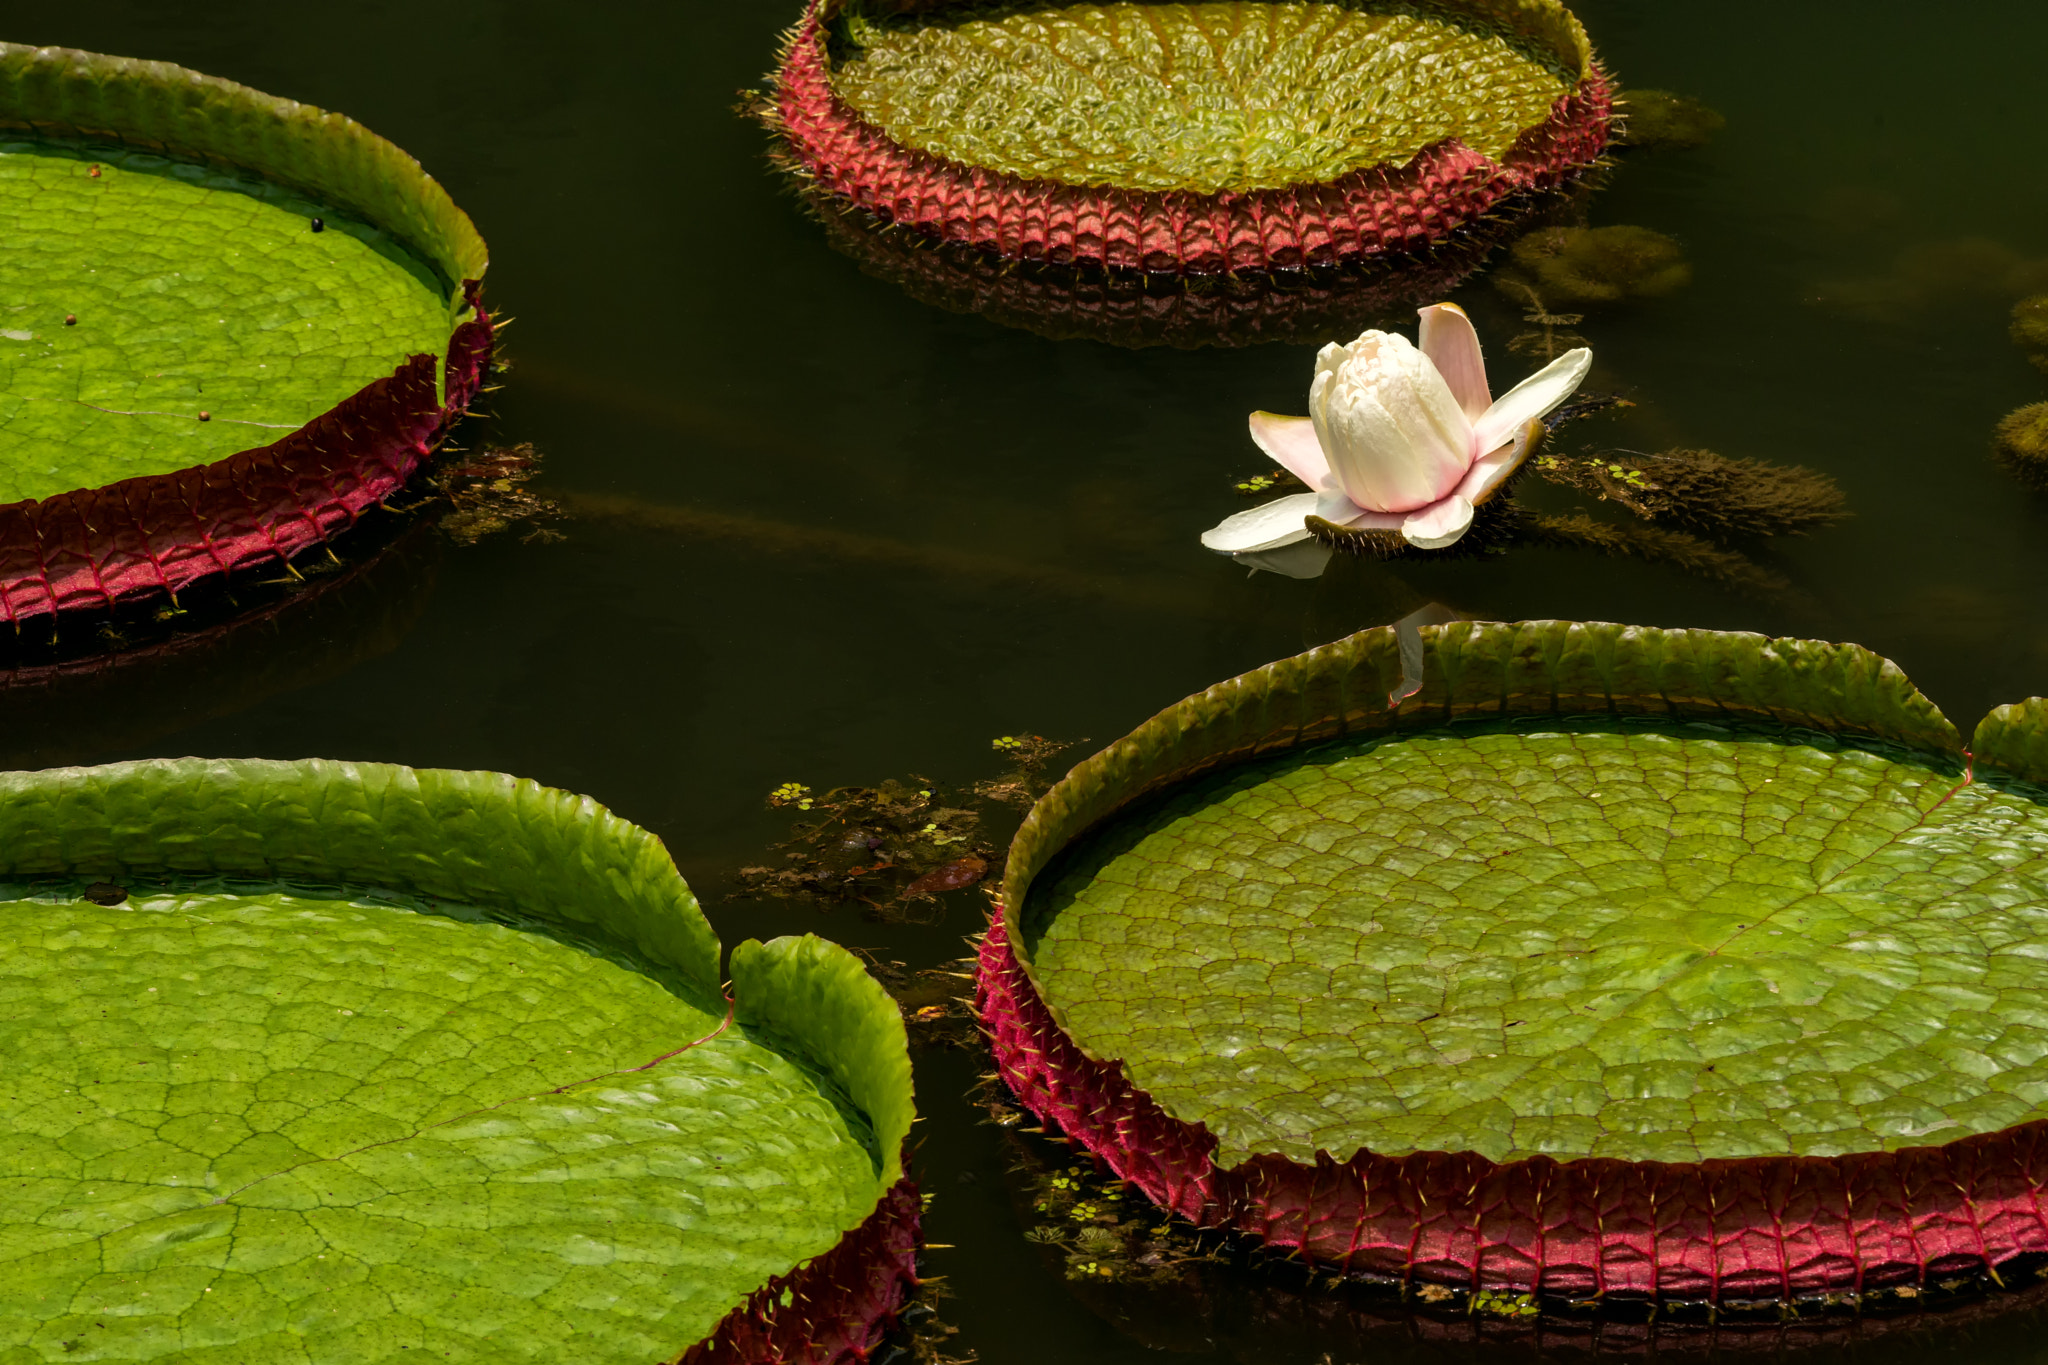 Sony a99 II + Tamron AF 18-250mm F3.5-6.3 Di II LD Aspherical (IF) Macro sample photo. Water lily and pads photography